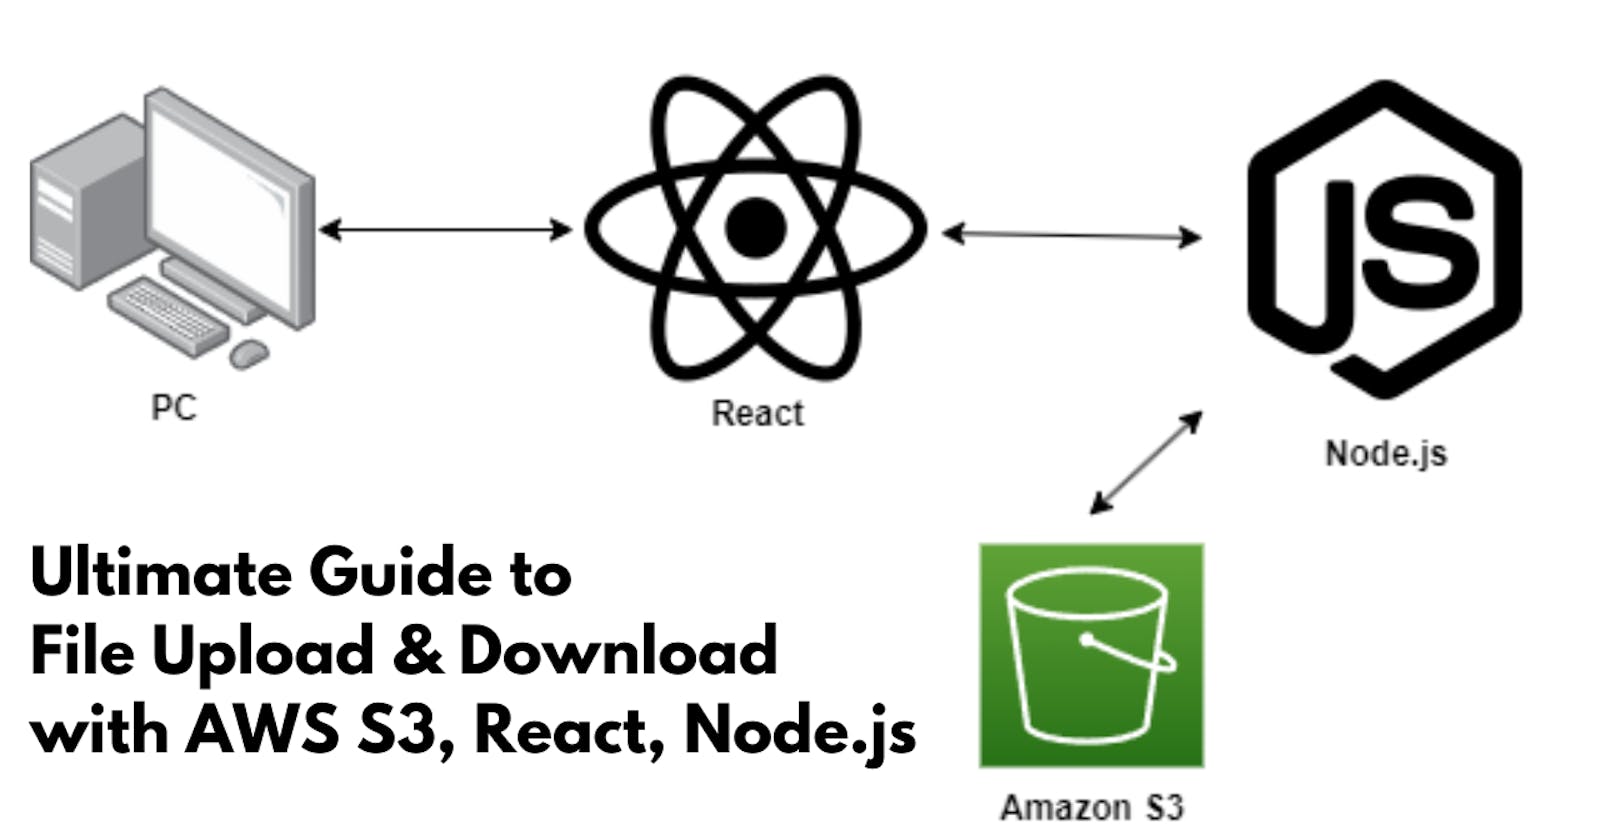 Ultimate Guide to File Upload & Download with AWS S3, React, Node.js